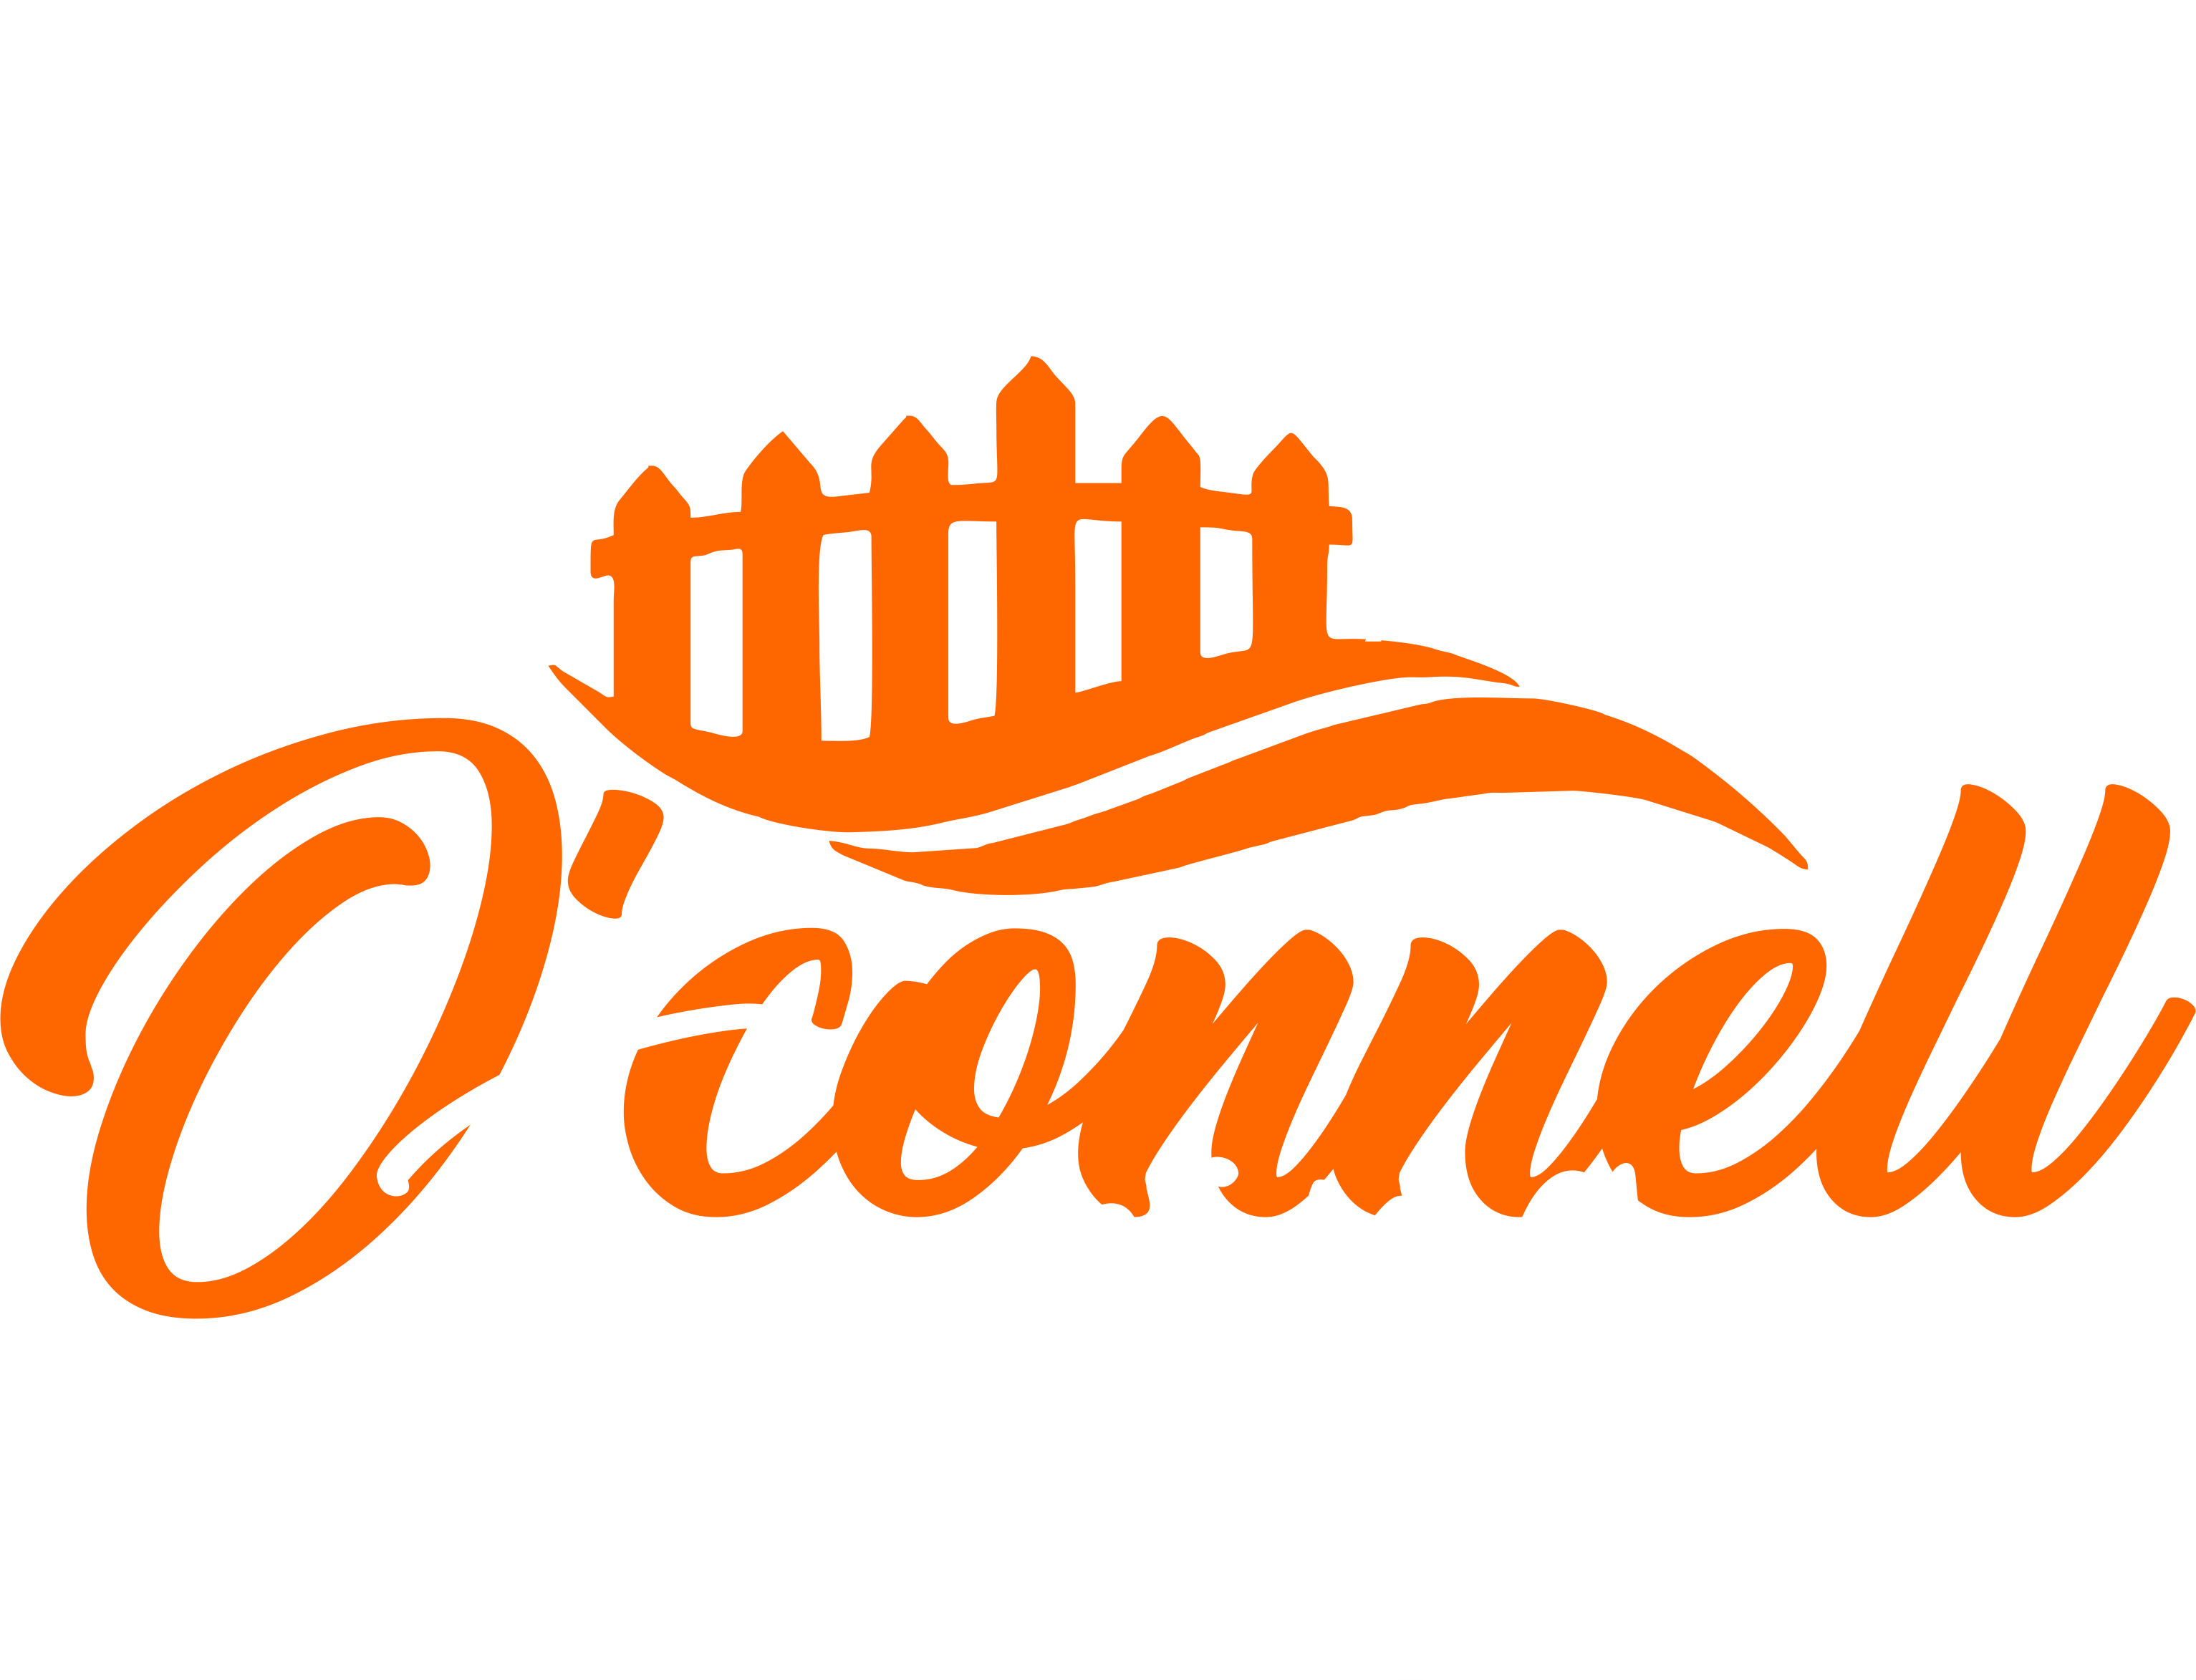 O'Connell Fencing